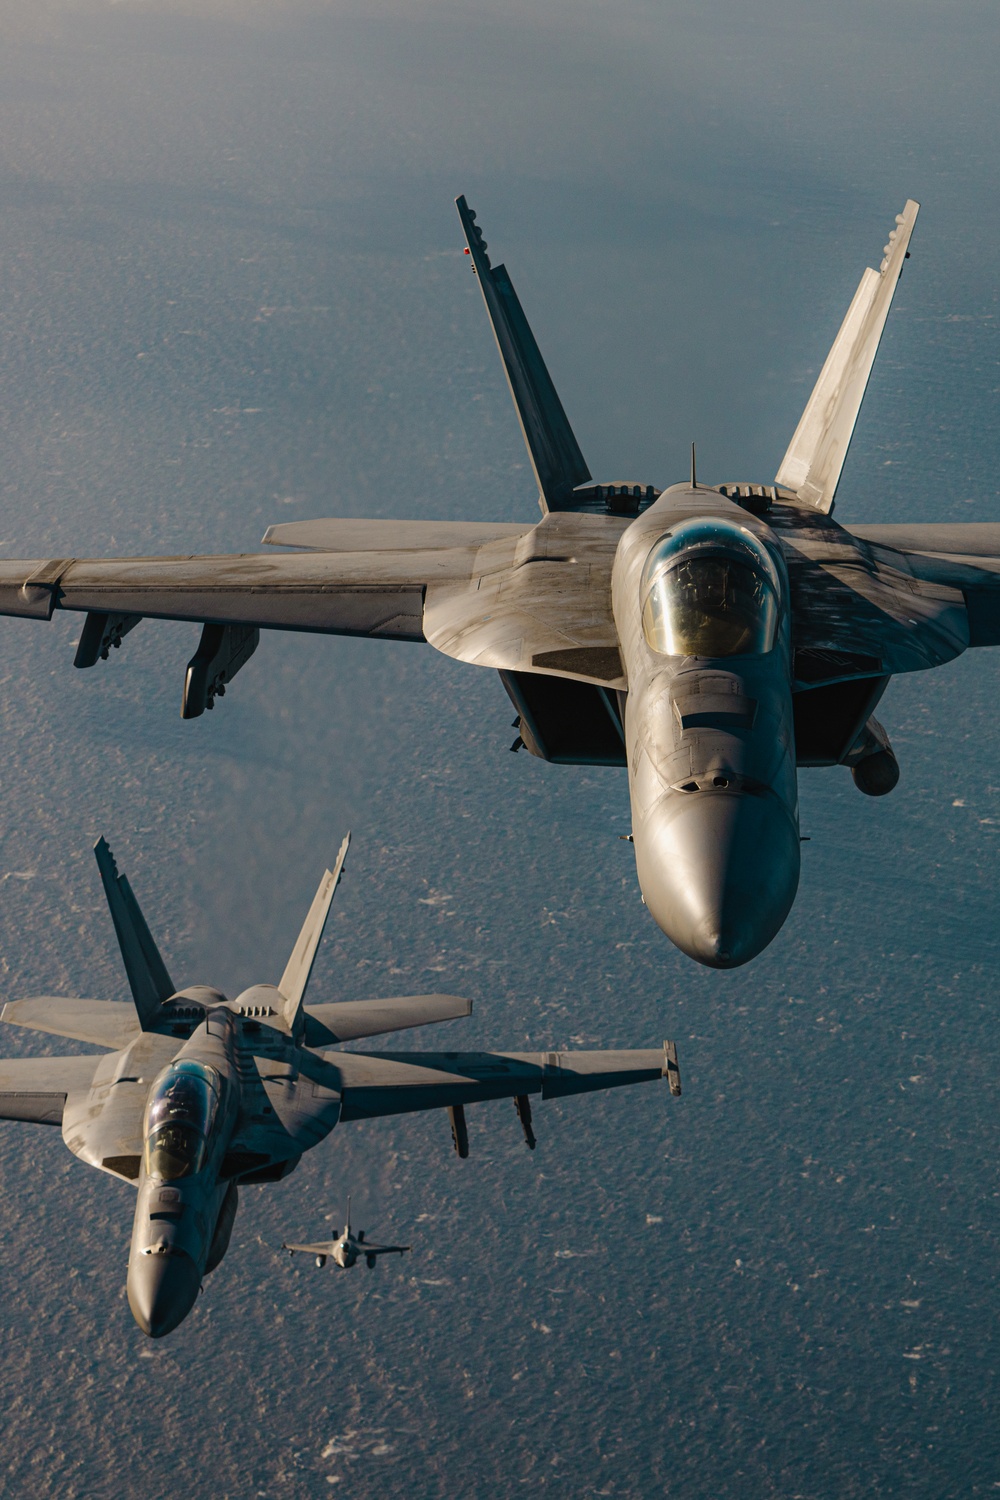 United States F/A-18 Super Hornets and Greek F-16 Fighting Falcons conduct air-to-air training over the Ionian Sea as a part of Neptune Strike 2022